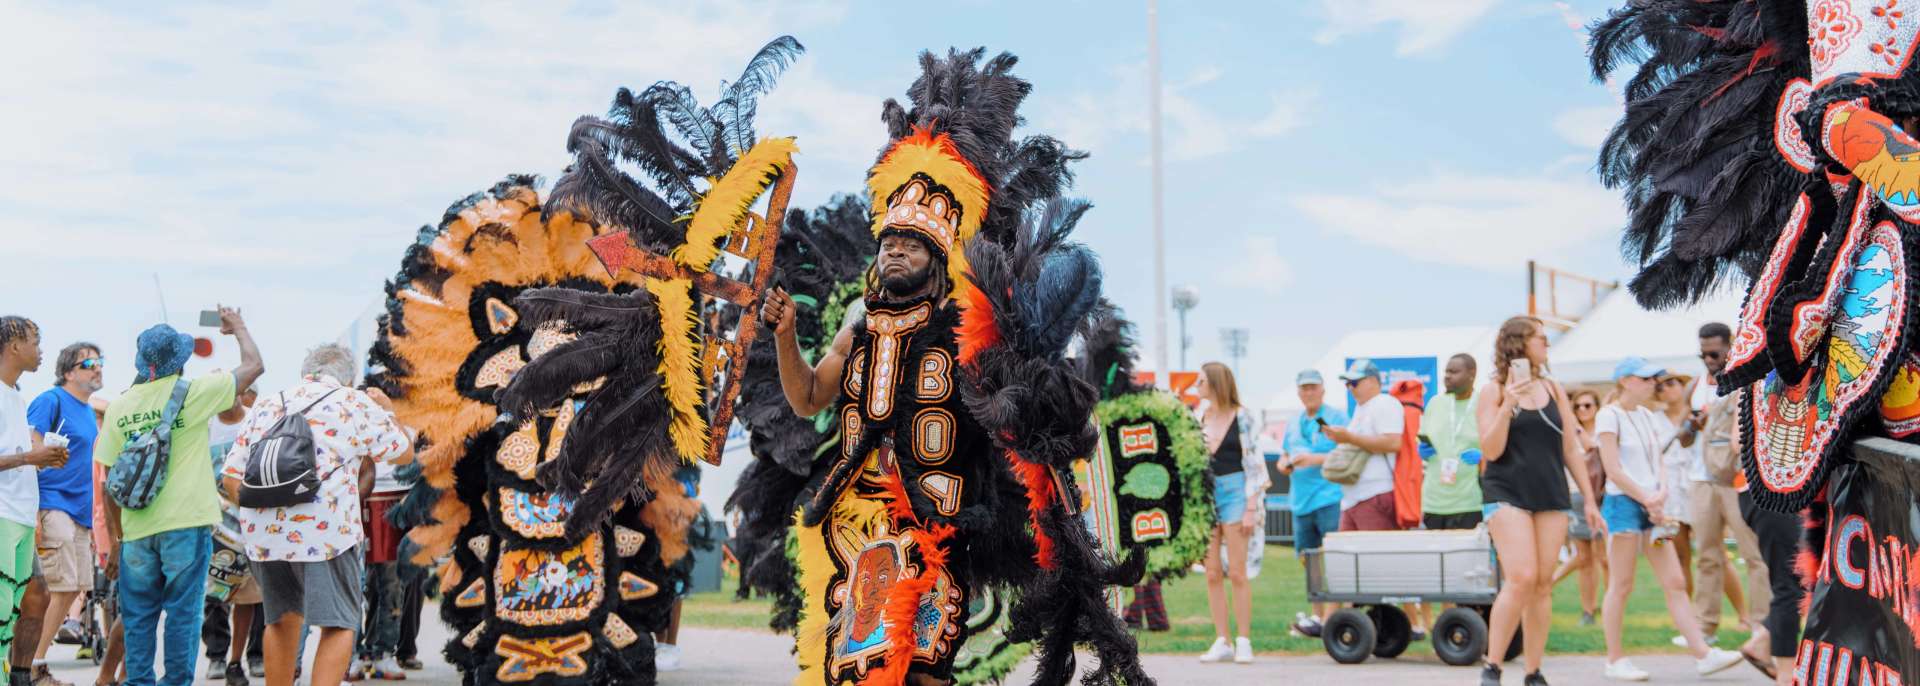 How the “Mardi Gras Indians” Compete to Craft the Most Stunning